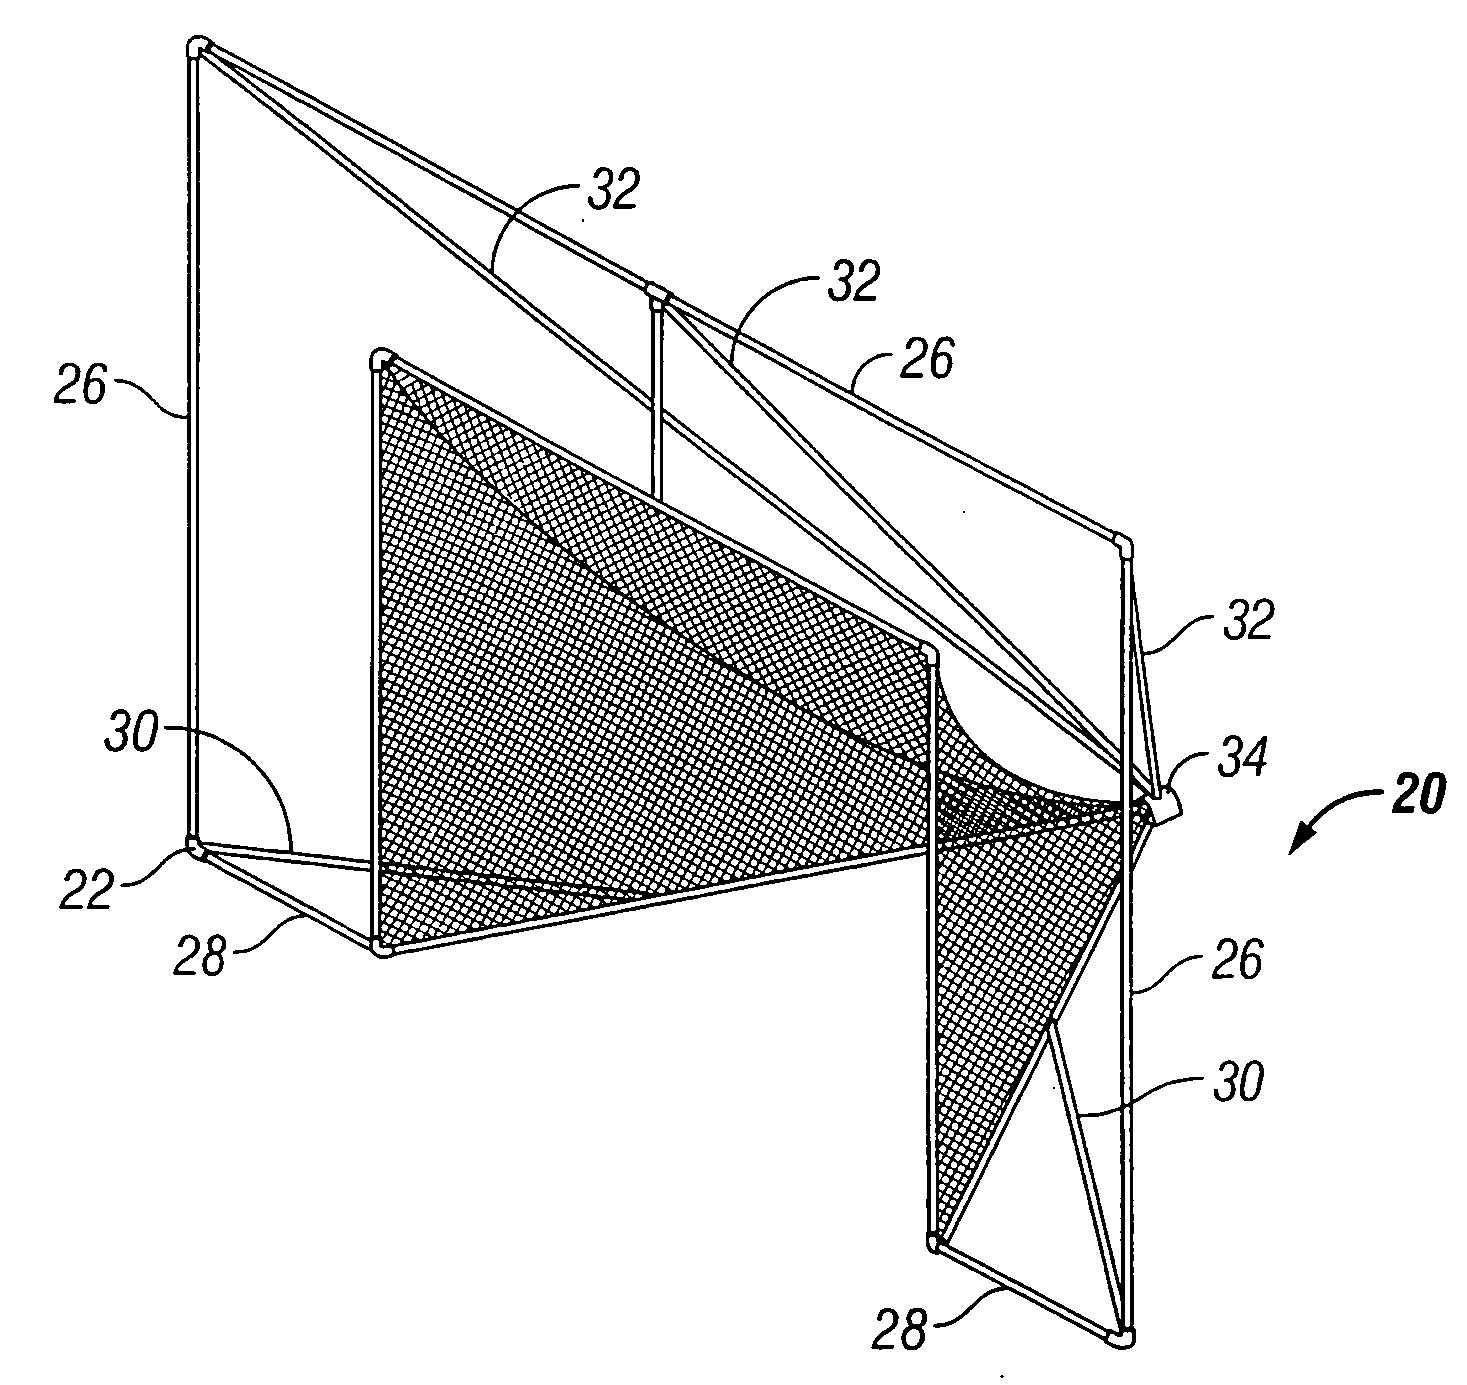 Method and apparatus for modifying a sports goal